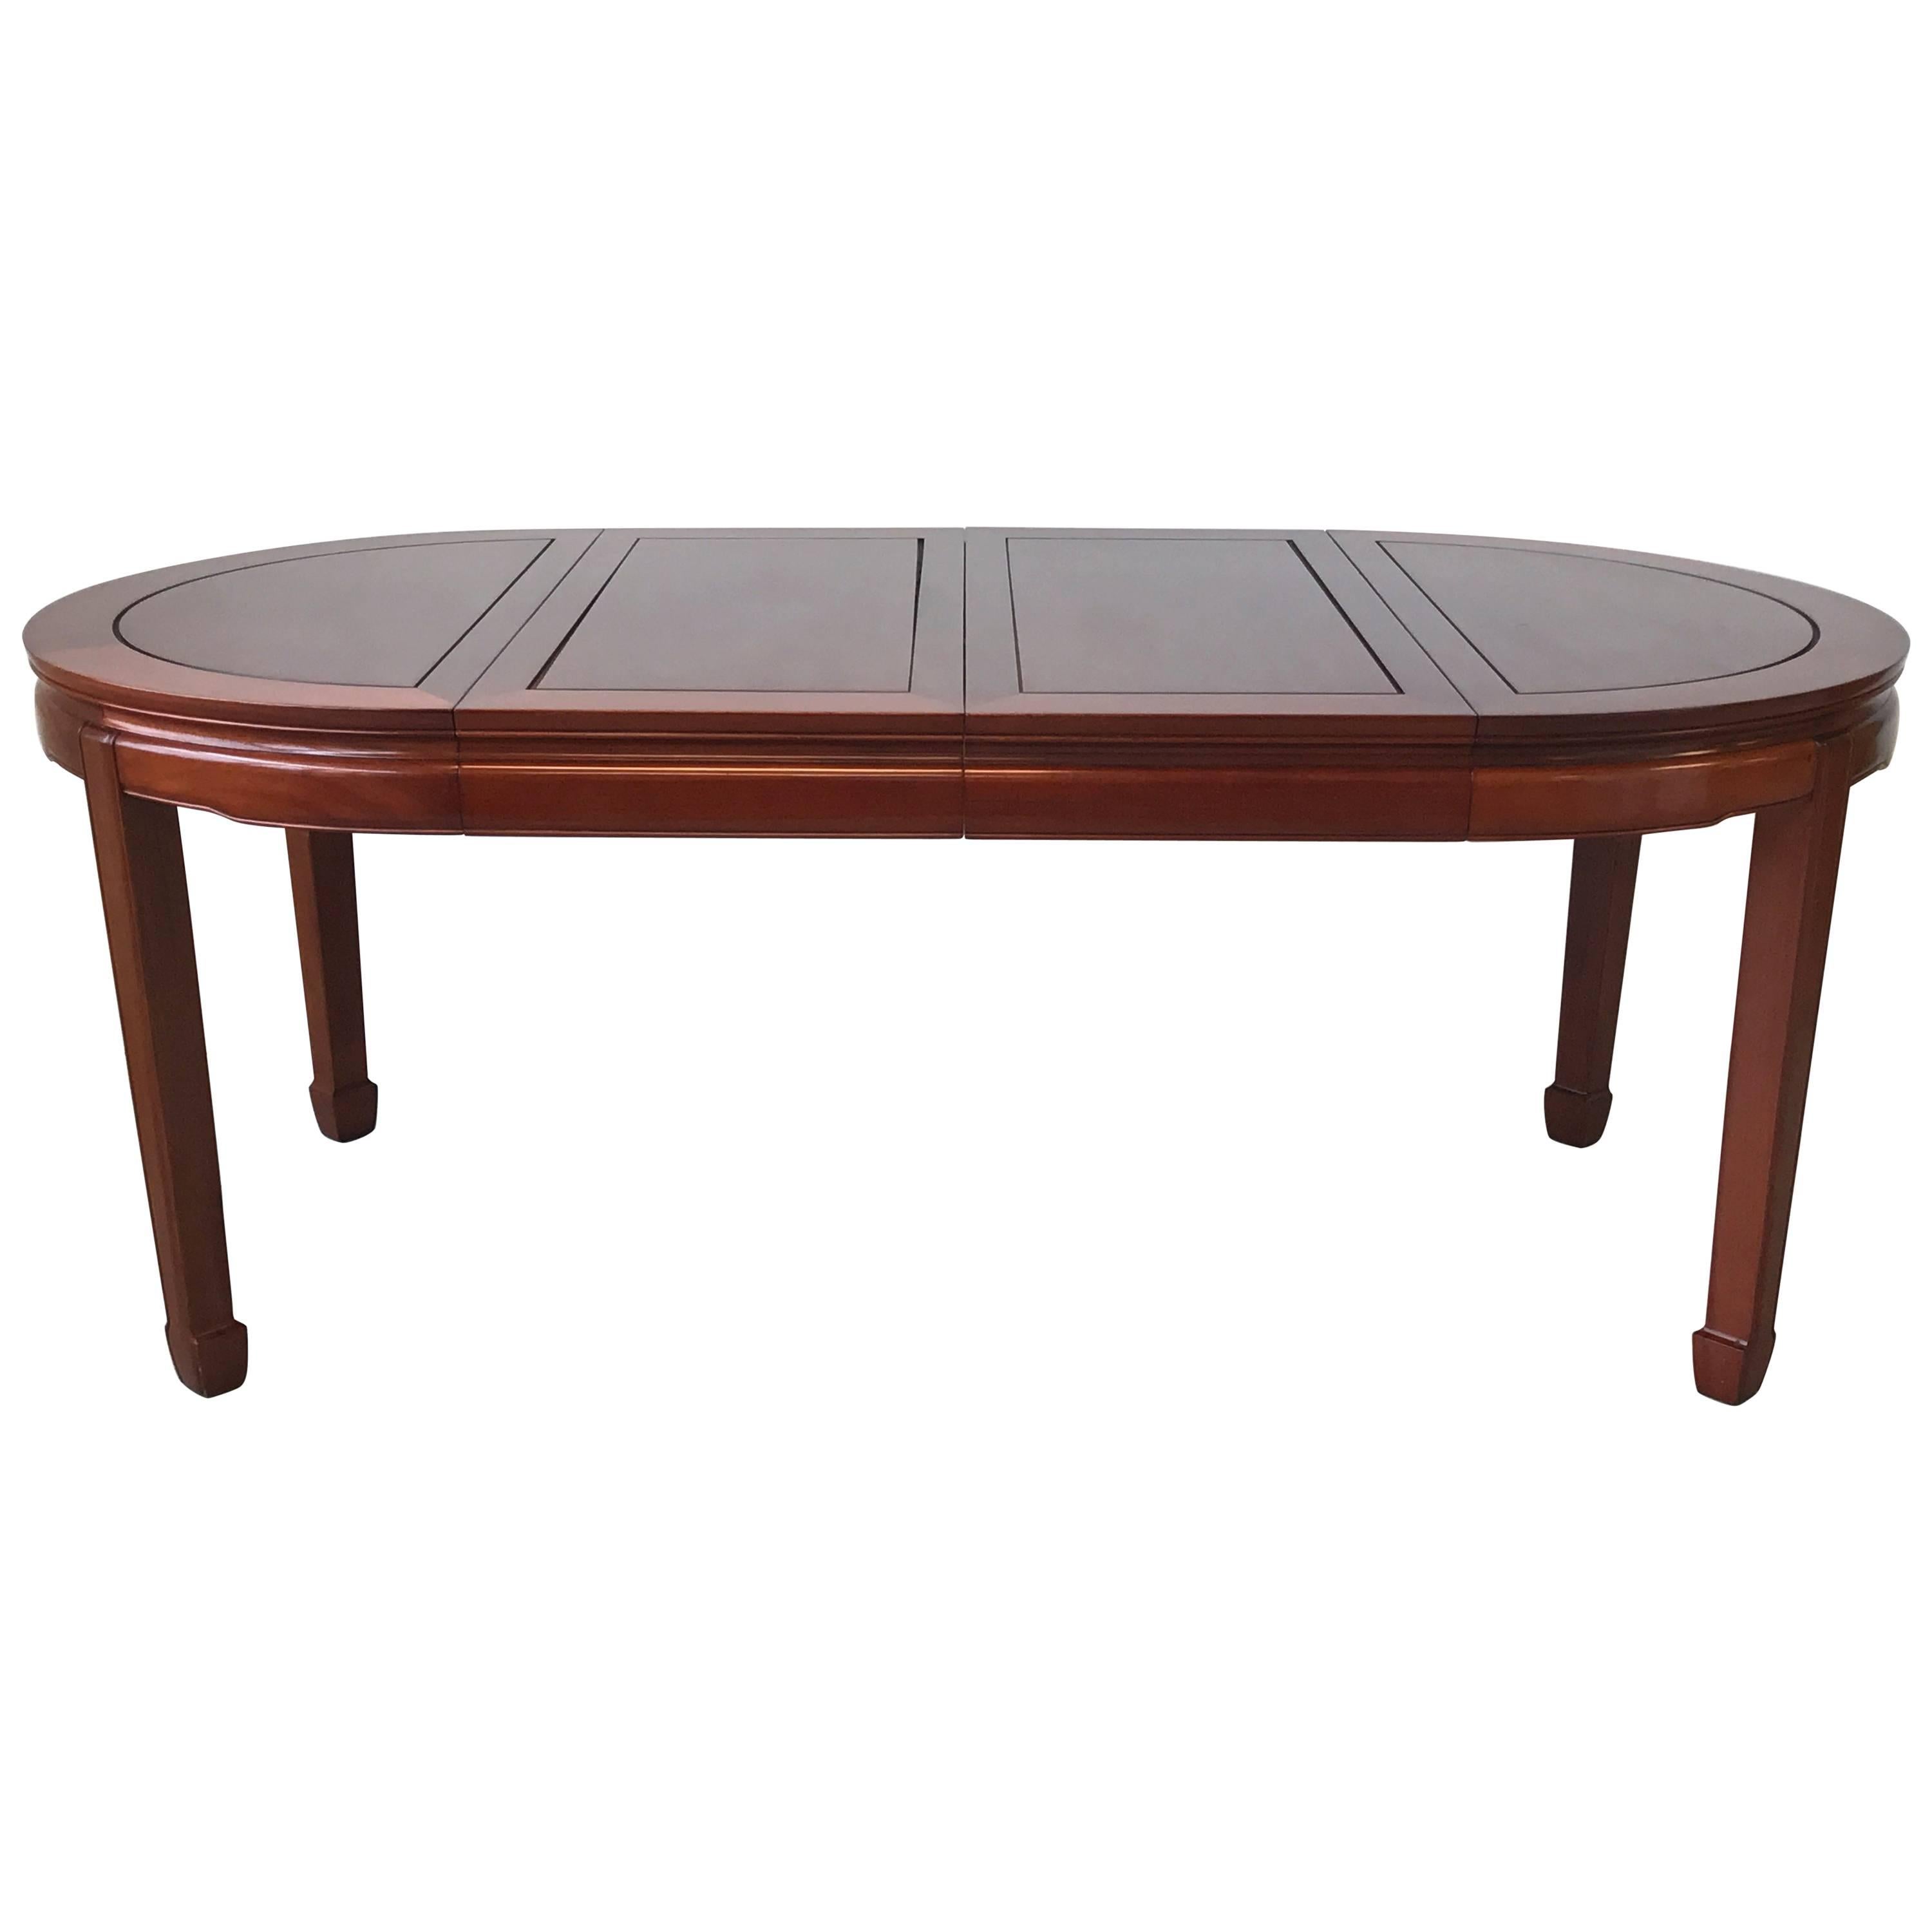 1960s Ming Style Rosewood Dining Table with Two Leaves For Sale